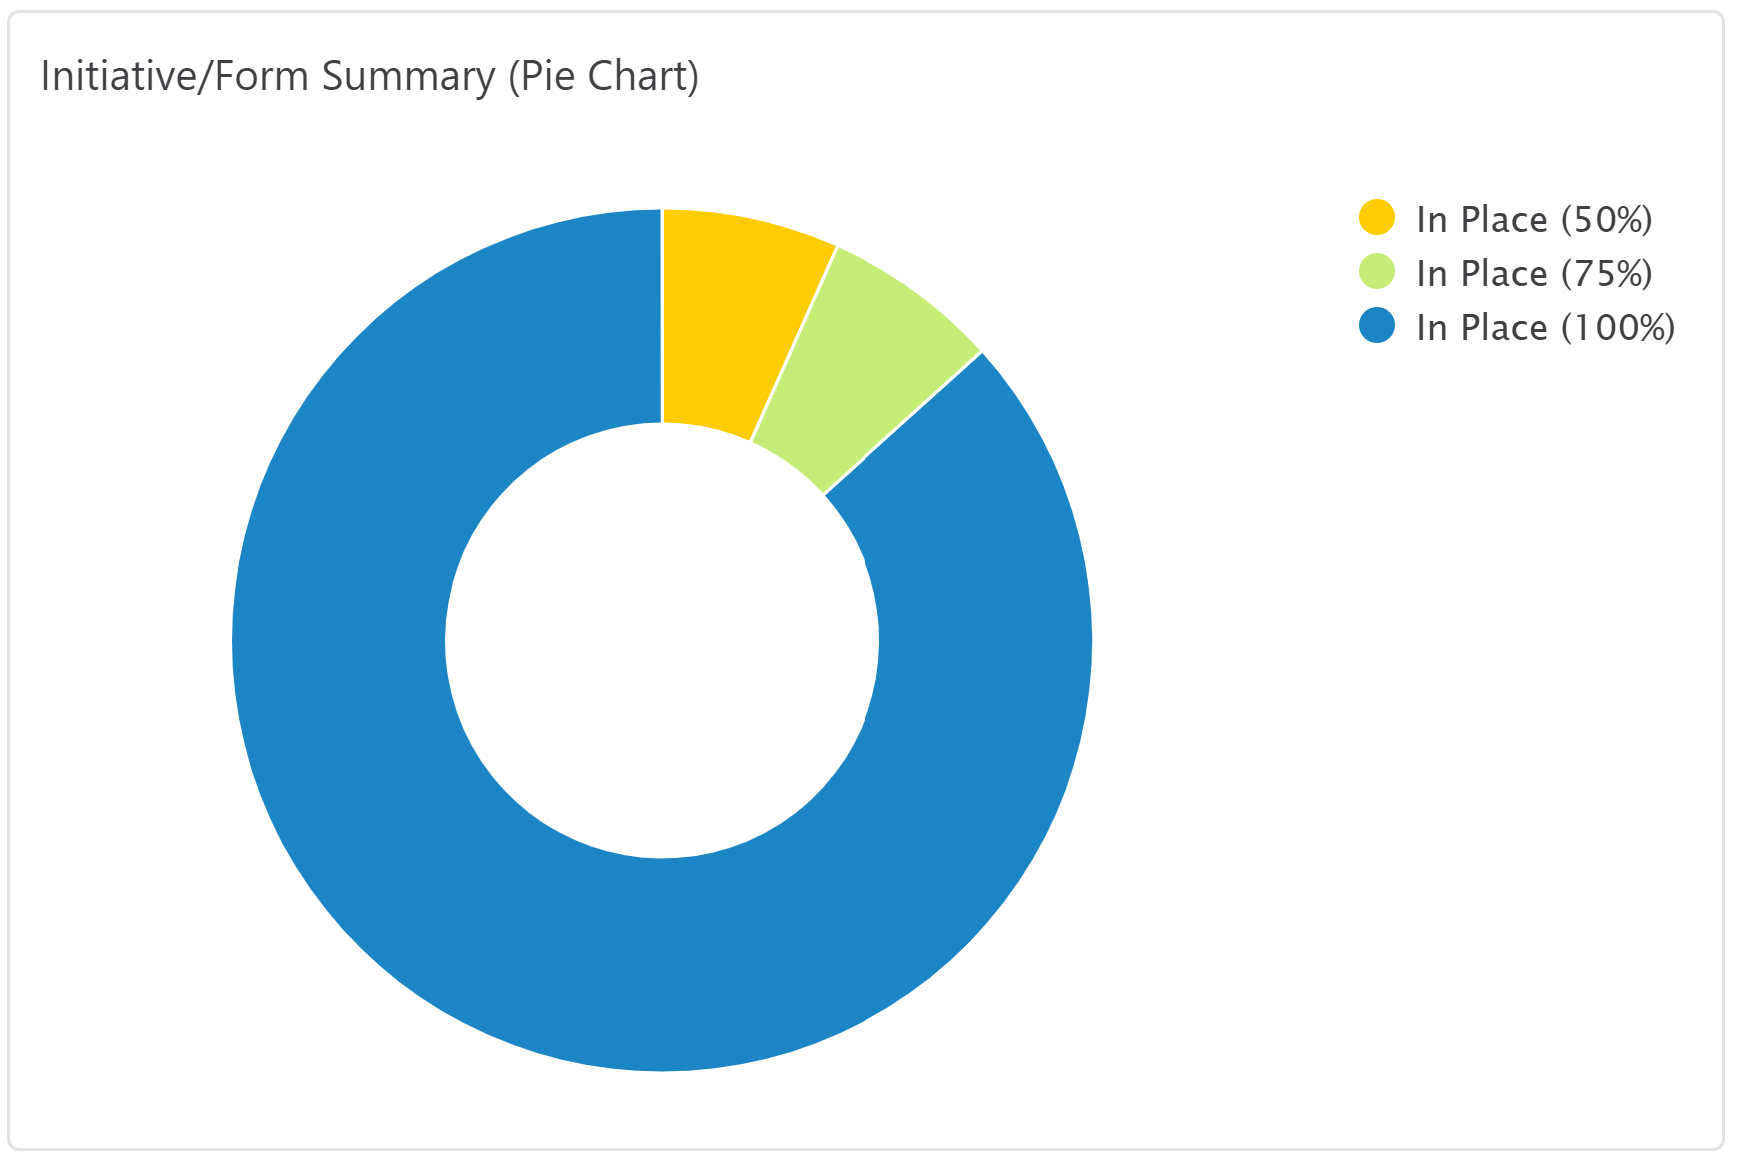 Filtered_Pie_Chart.png